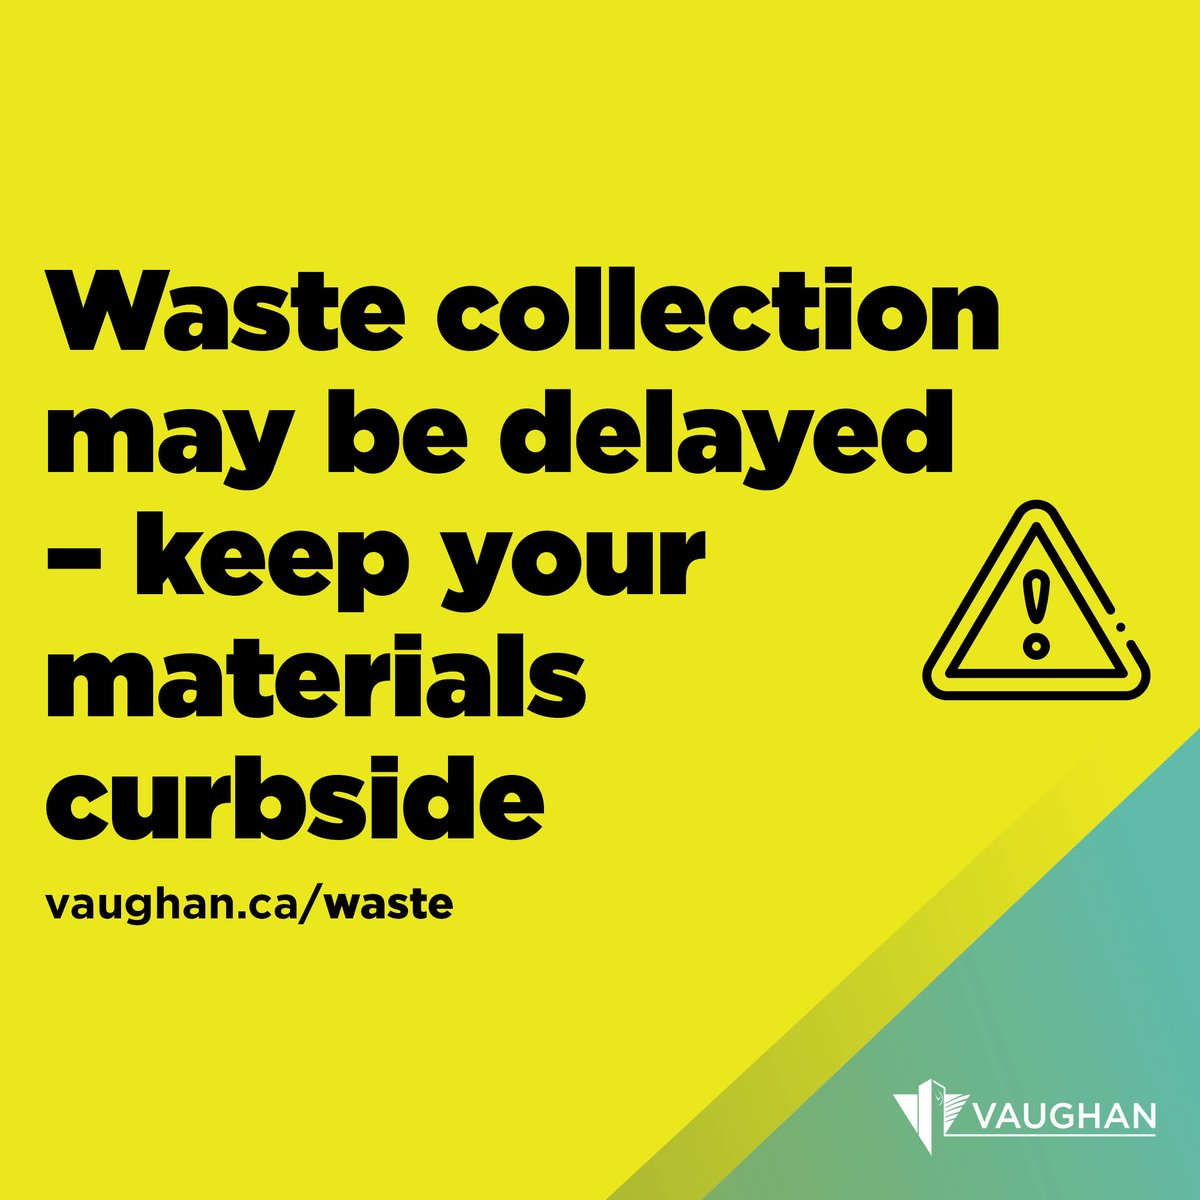 Leaf and yard waste collection may be delayed today due to high volumes of material. Please leave your waste curbside until it is picked up – possibly late this evening. Learn more about waste services at vaughan.ca/waste